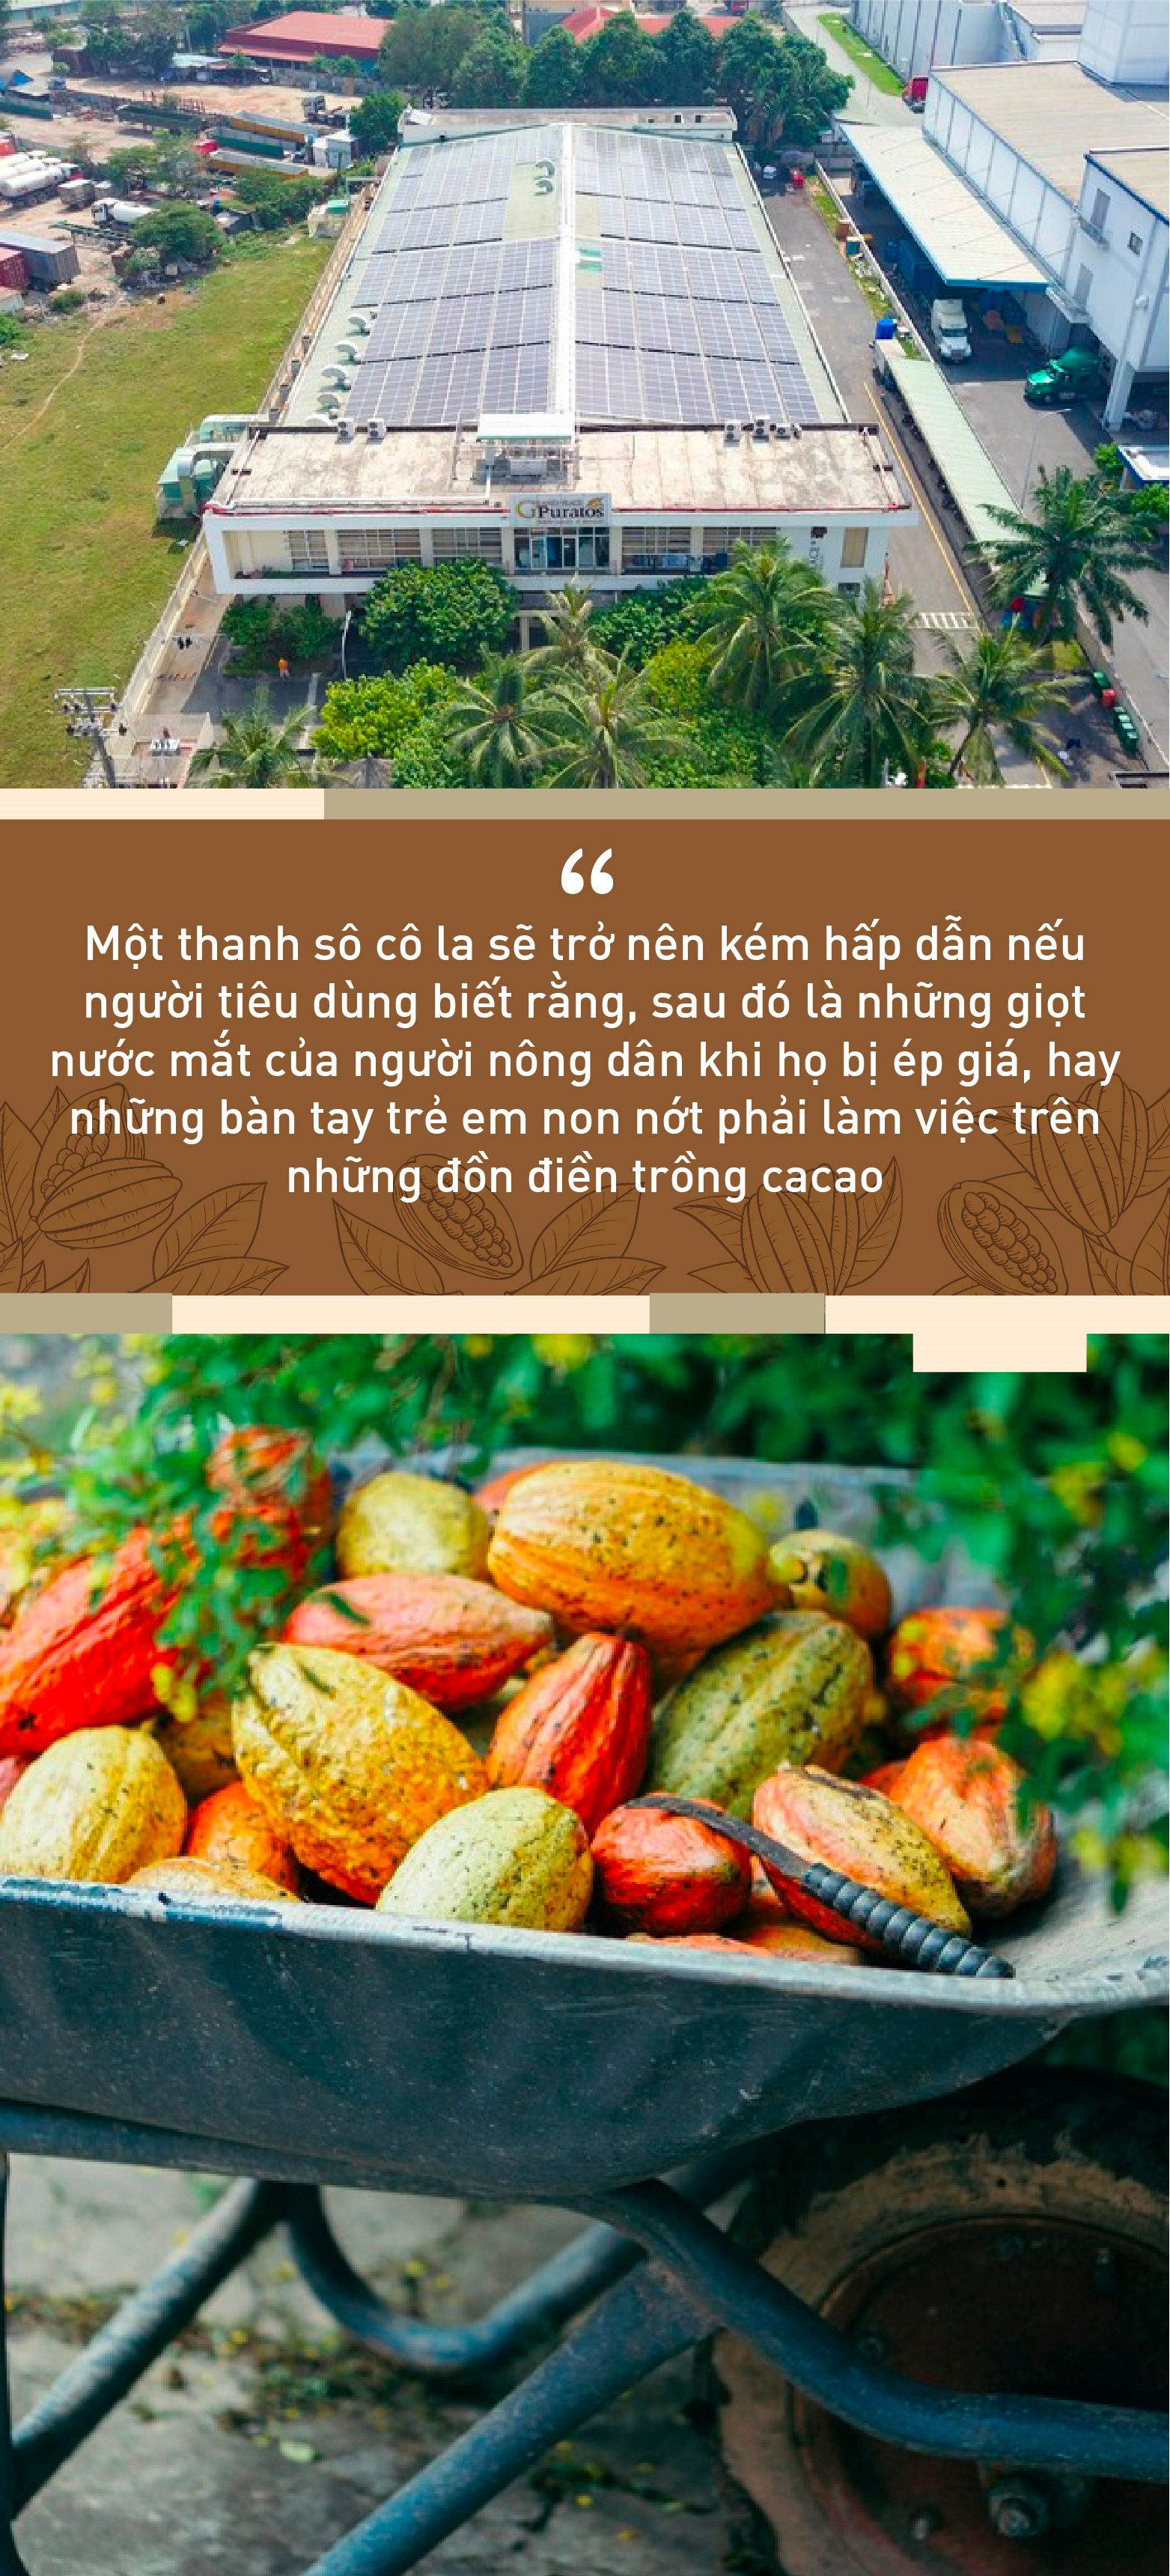 cacao-quote-3-03.jpg